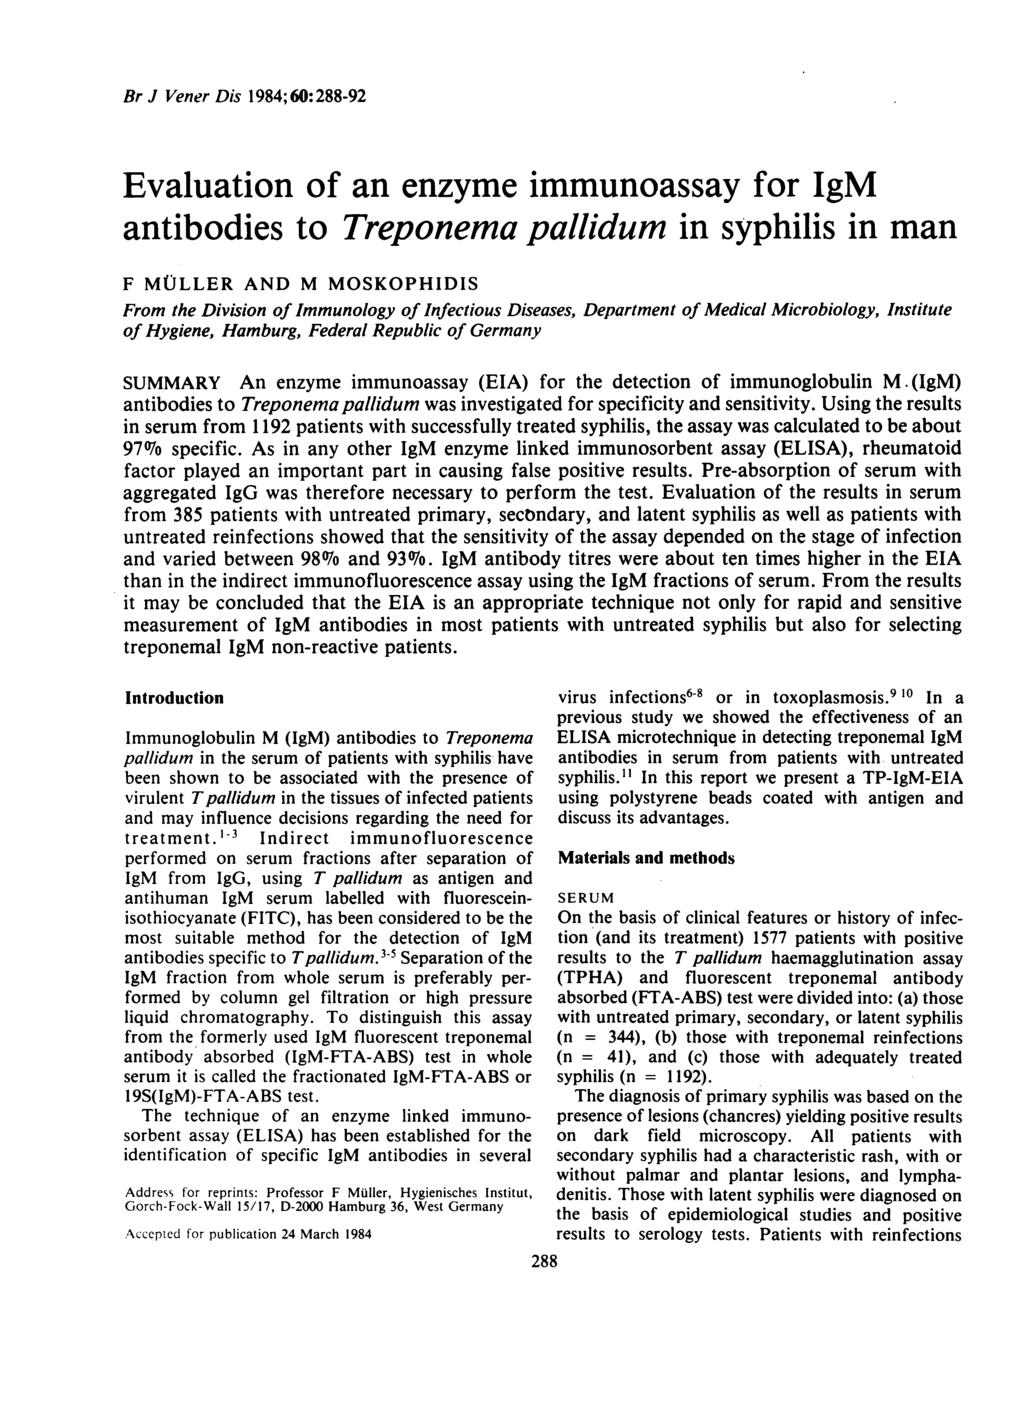 Br J Vener Dis 1984; 60:288-92 Evaluation of an enzyme immunoassay for IgM antibodies to Treponema pallidum in syphilis in man F MULLER AND M MOSKOPHIDIS From the Division of Immunology of Infectious